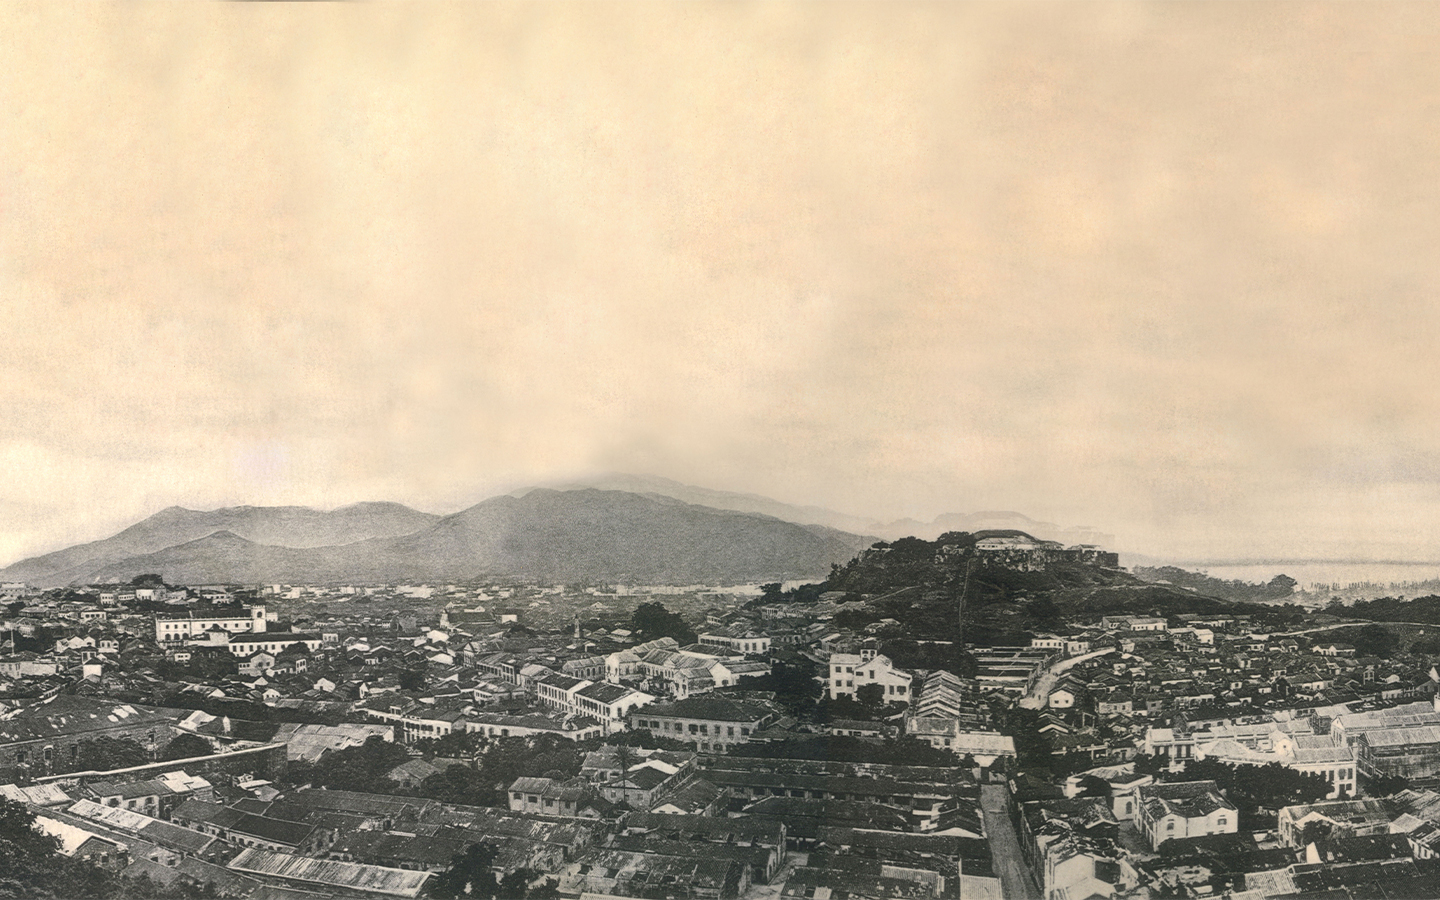 Macao panoramic view with Macao Fort in the centre (before 1910) - Photo courtesy of Cultural Affairs Bureau of Macao